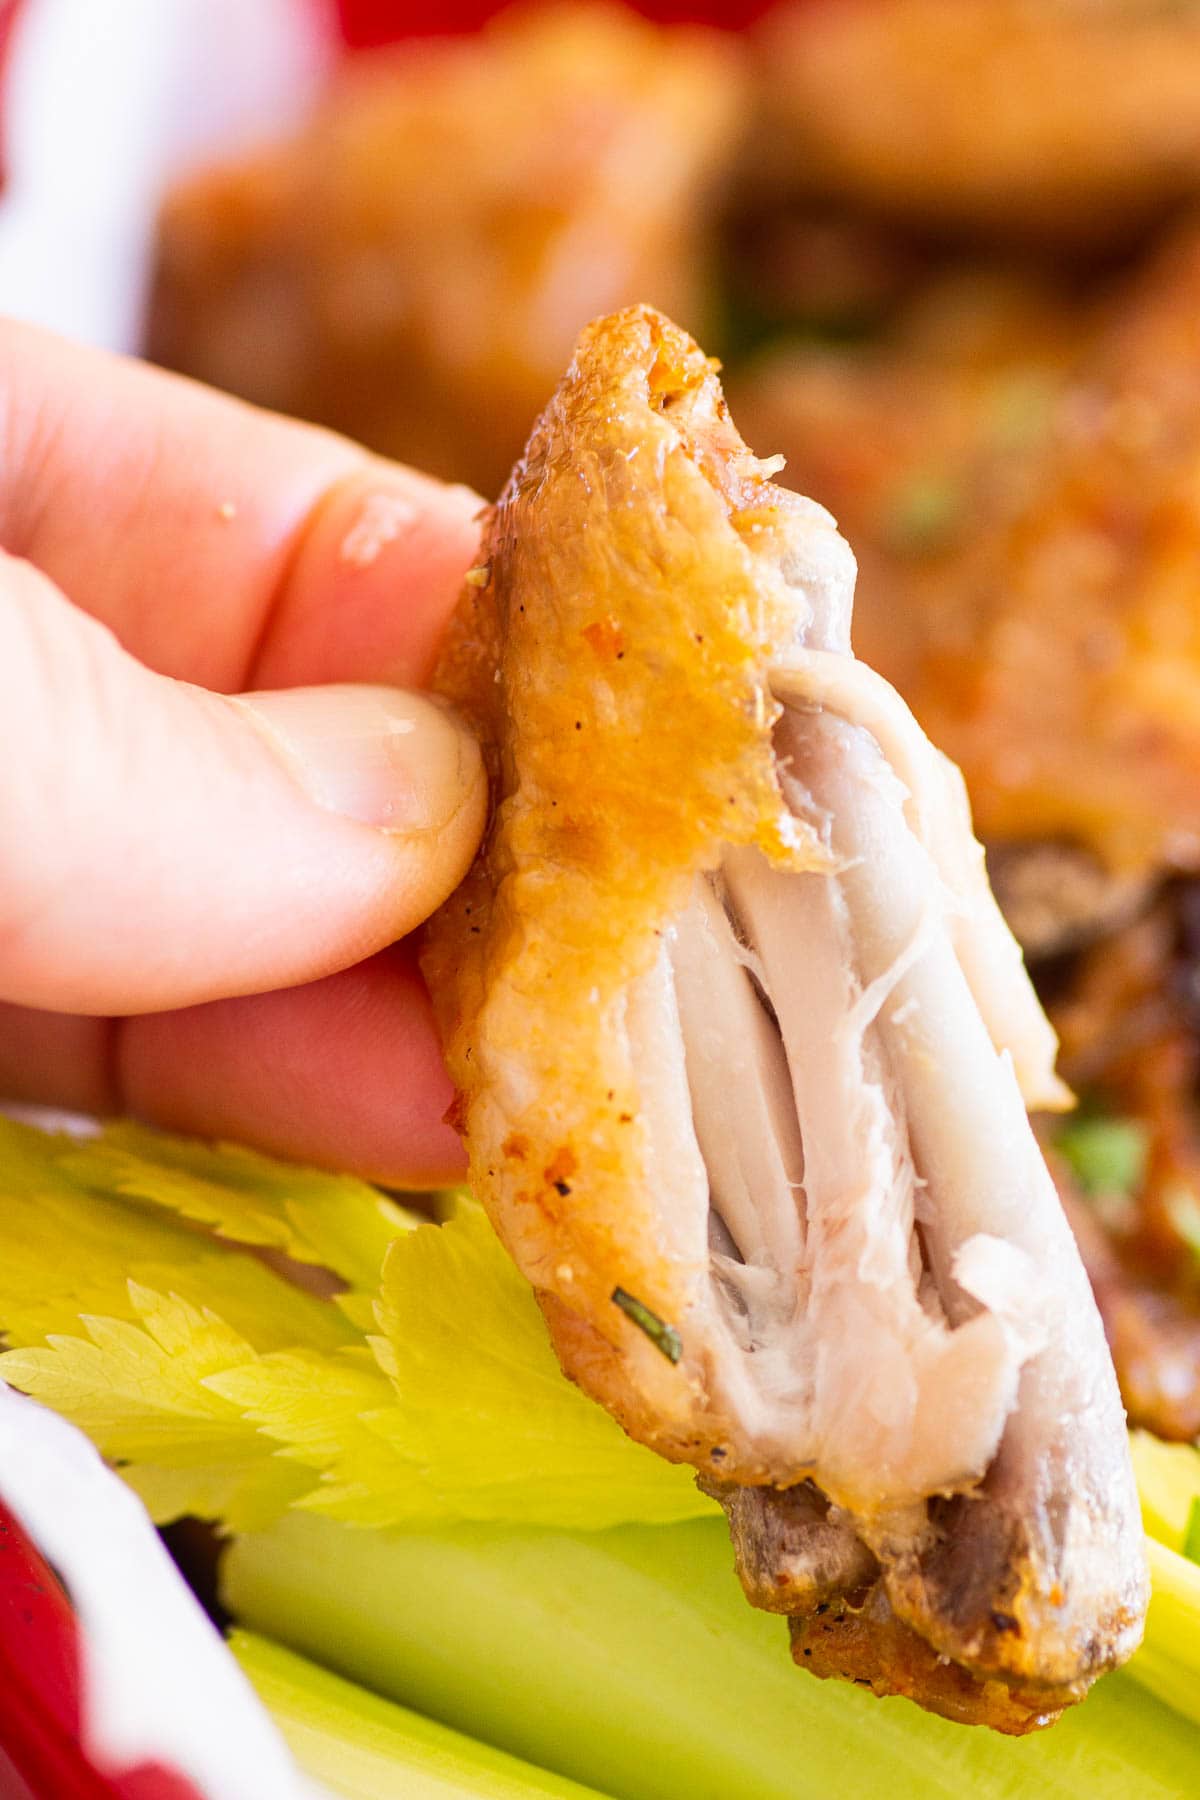 Showing how tender the inside of the chicken wings is.